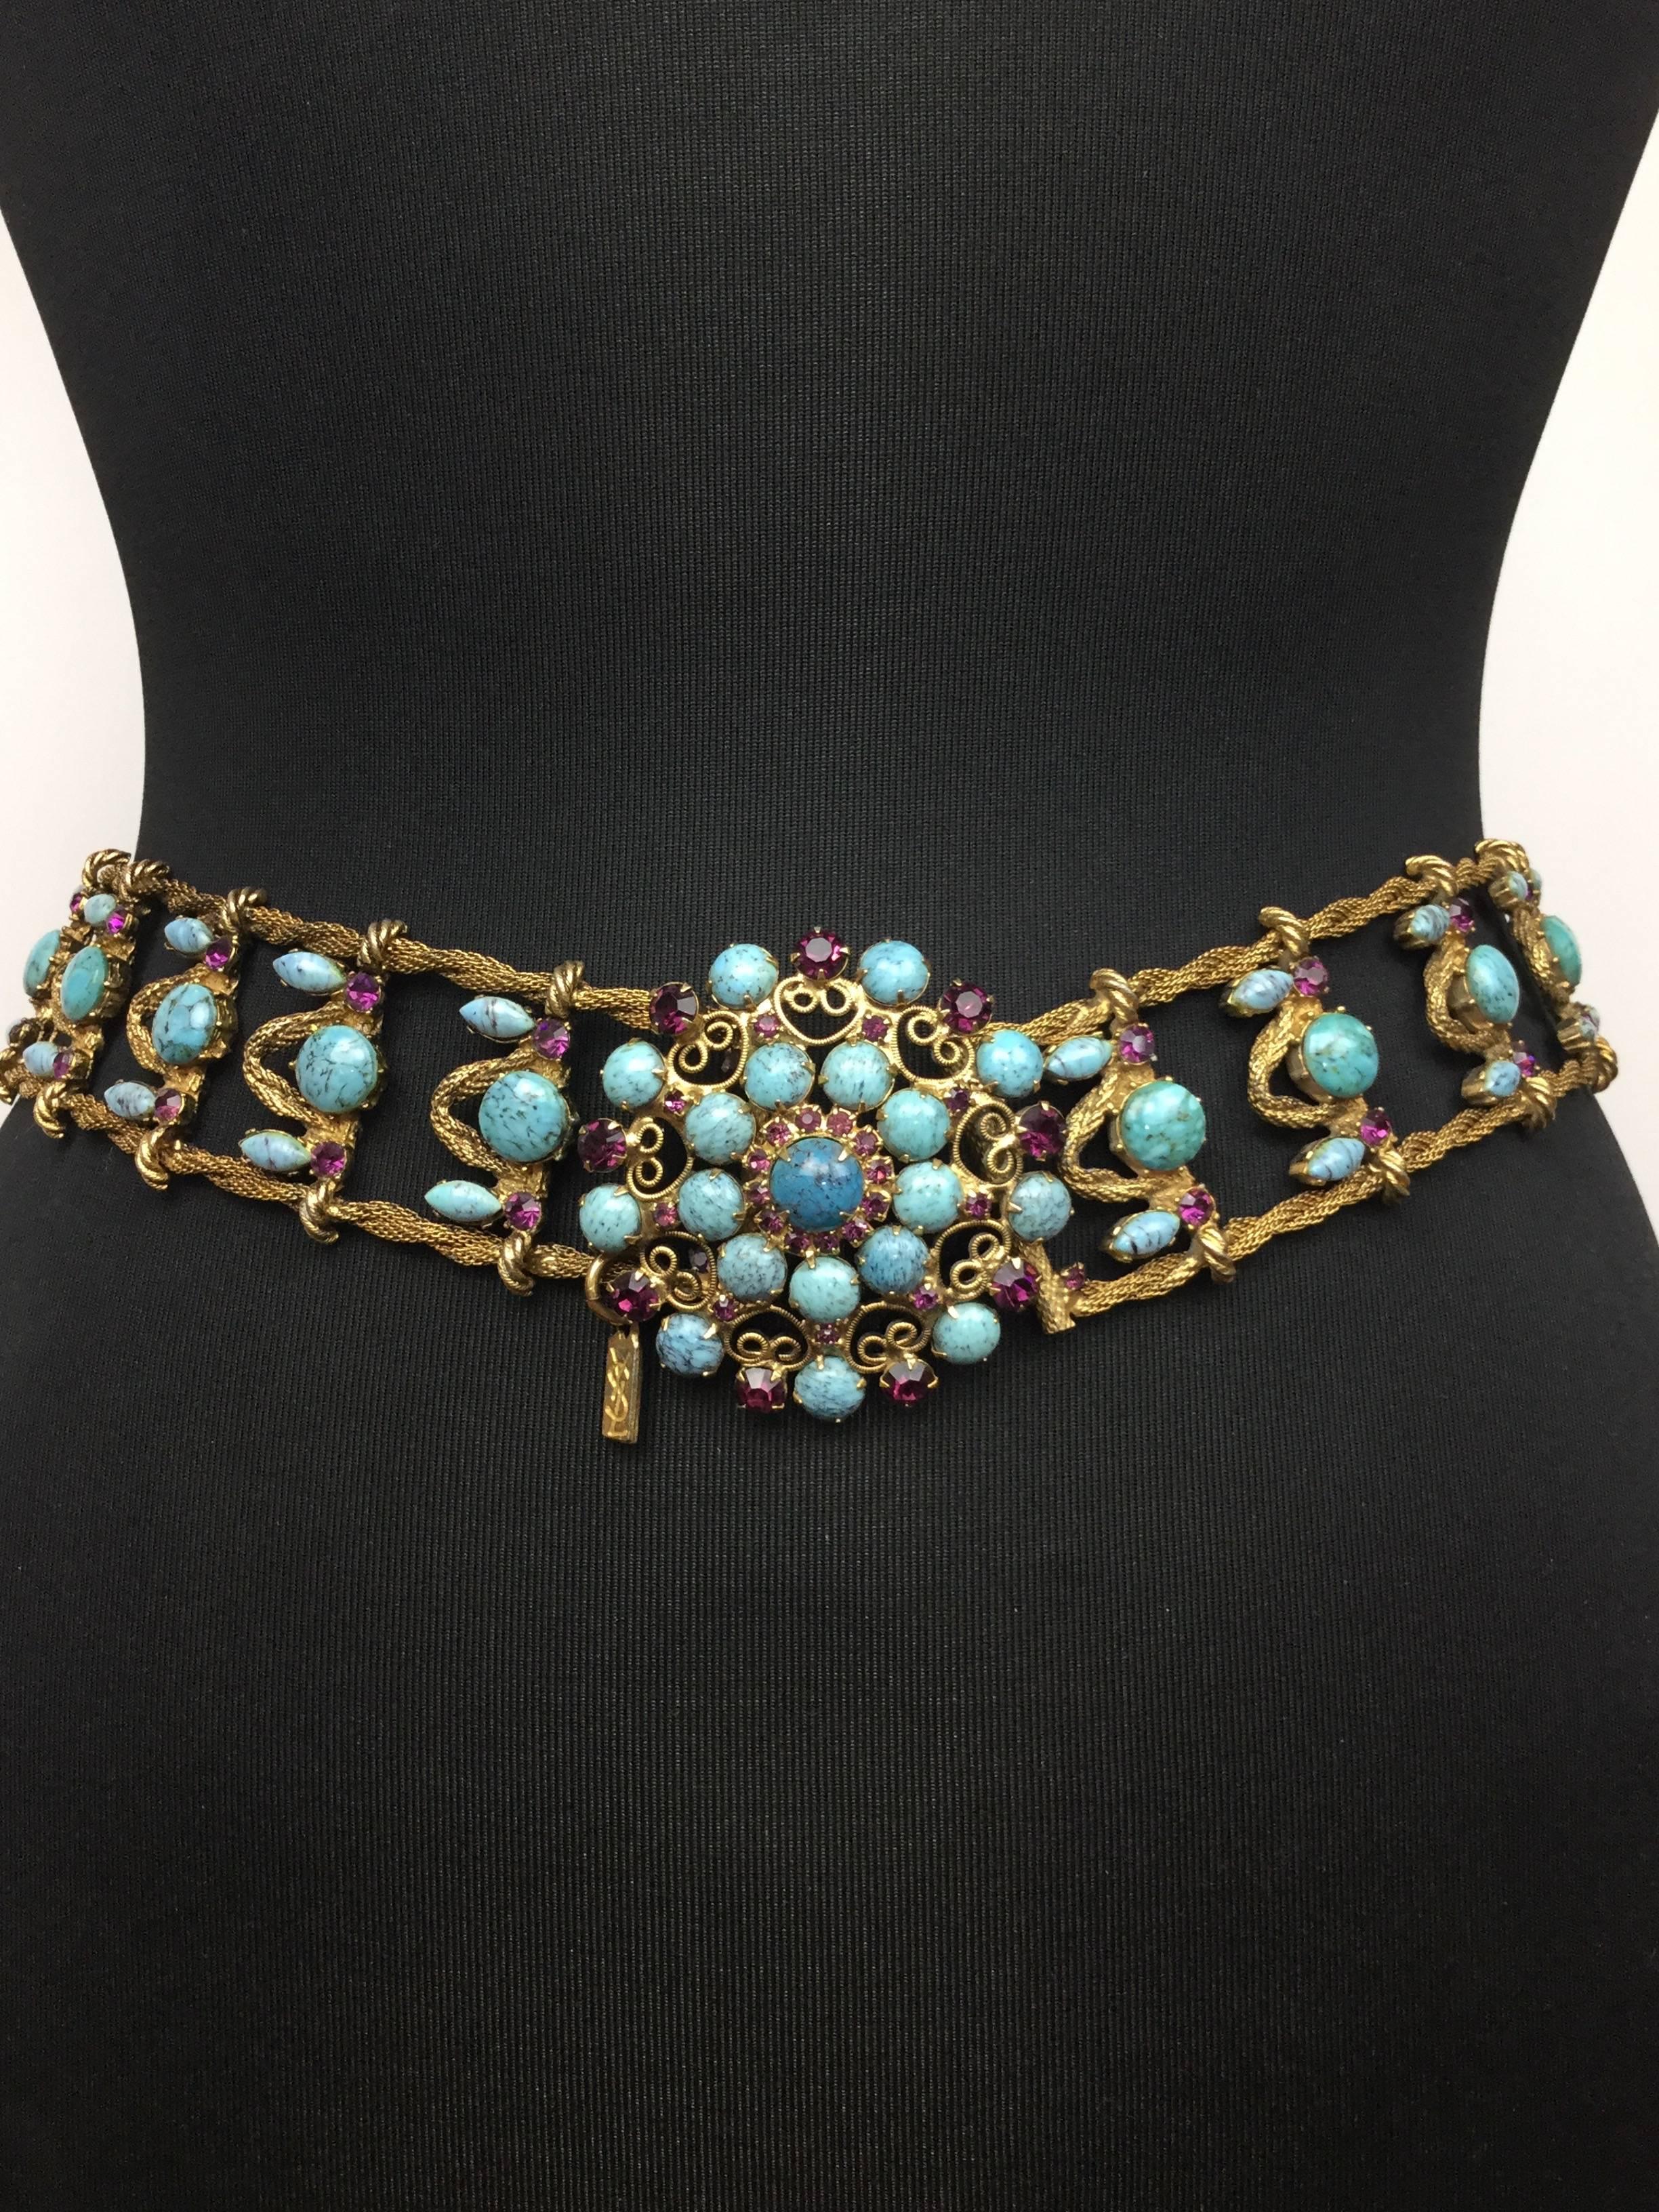 Brown Incredible Yves Saint Laurent Metal Belt with Faux Turquoise Cabochons. 1970's.